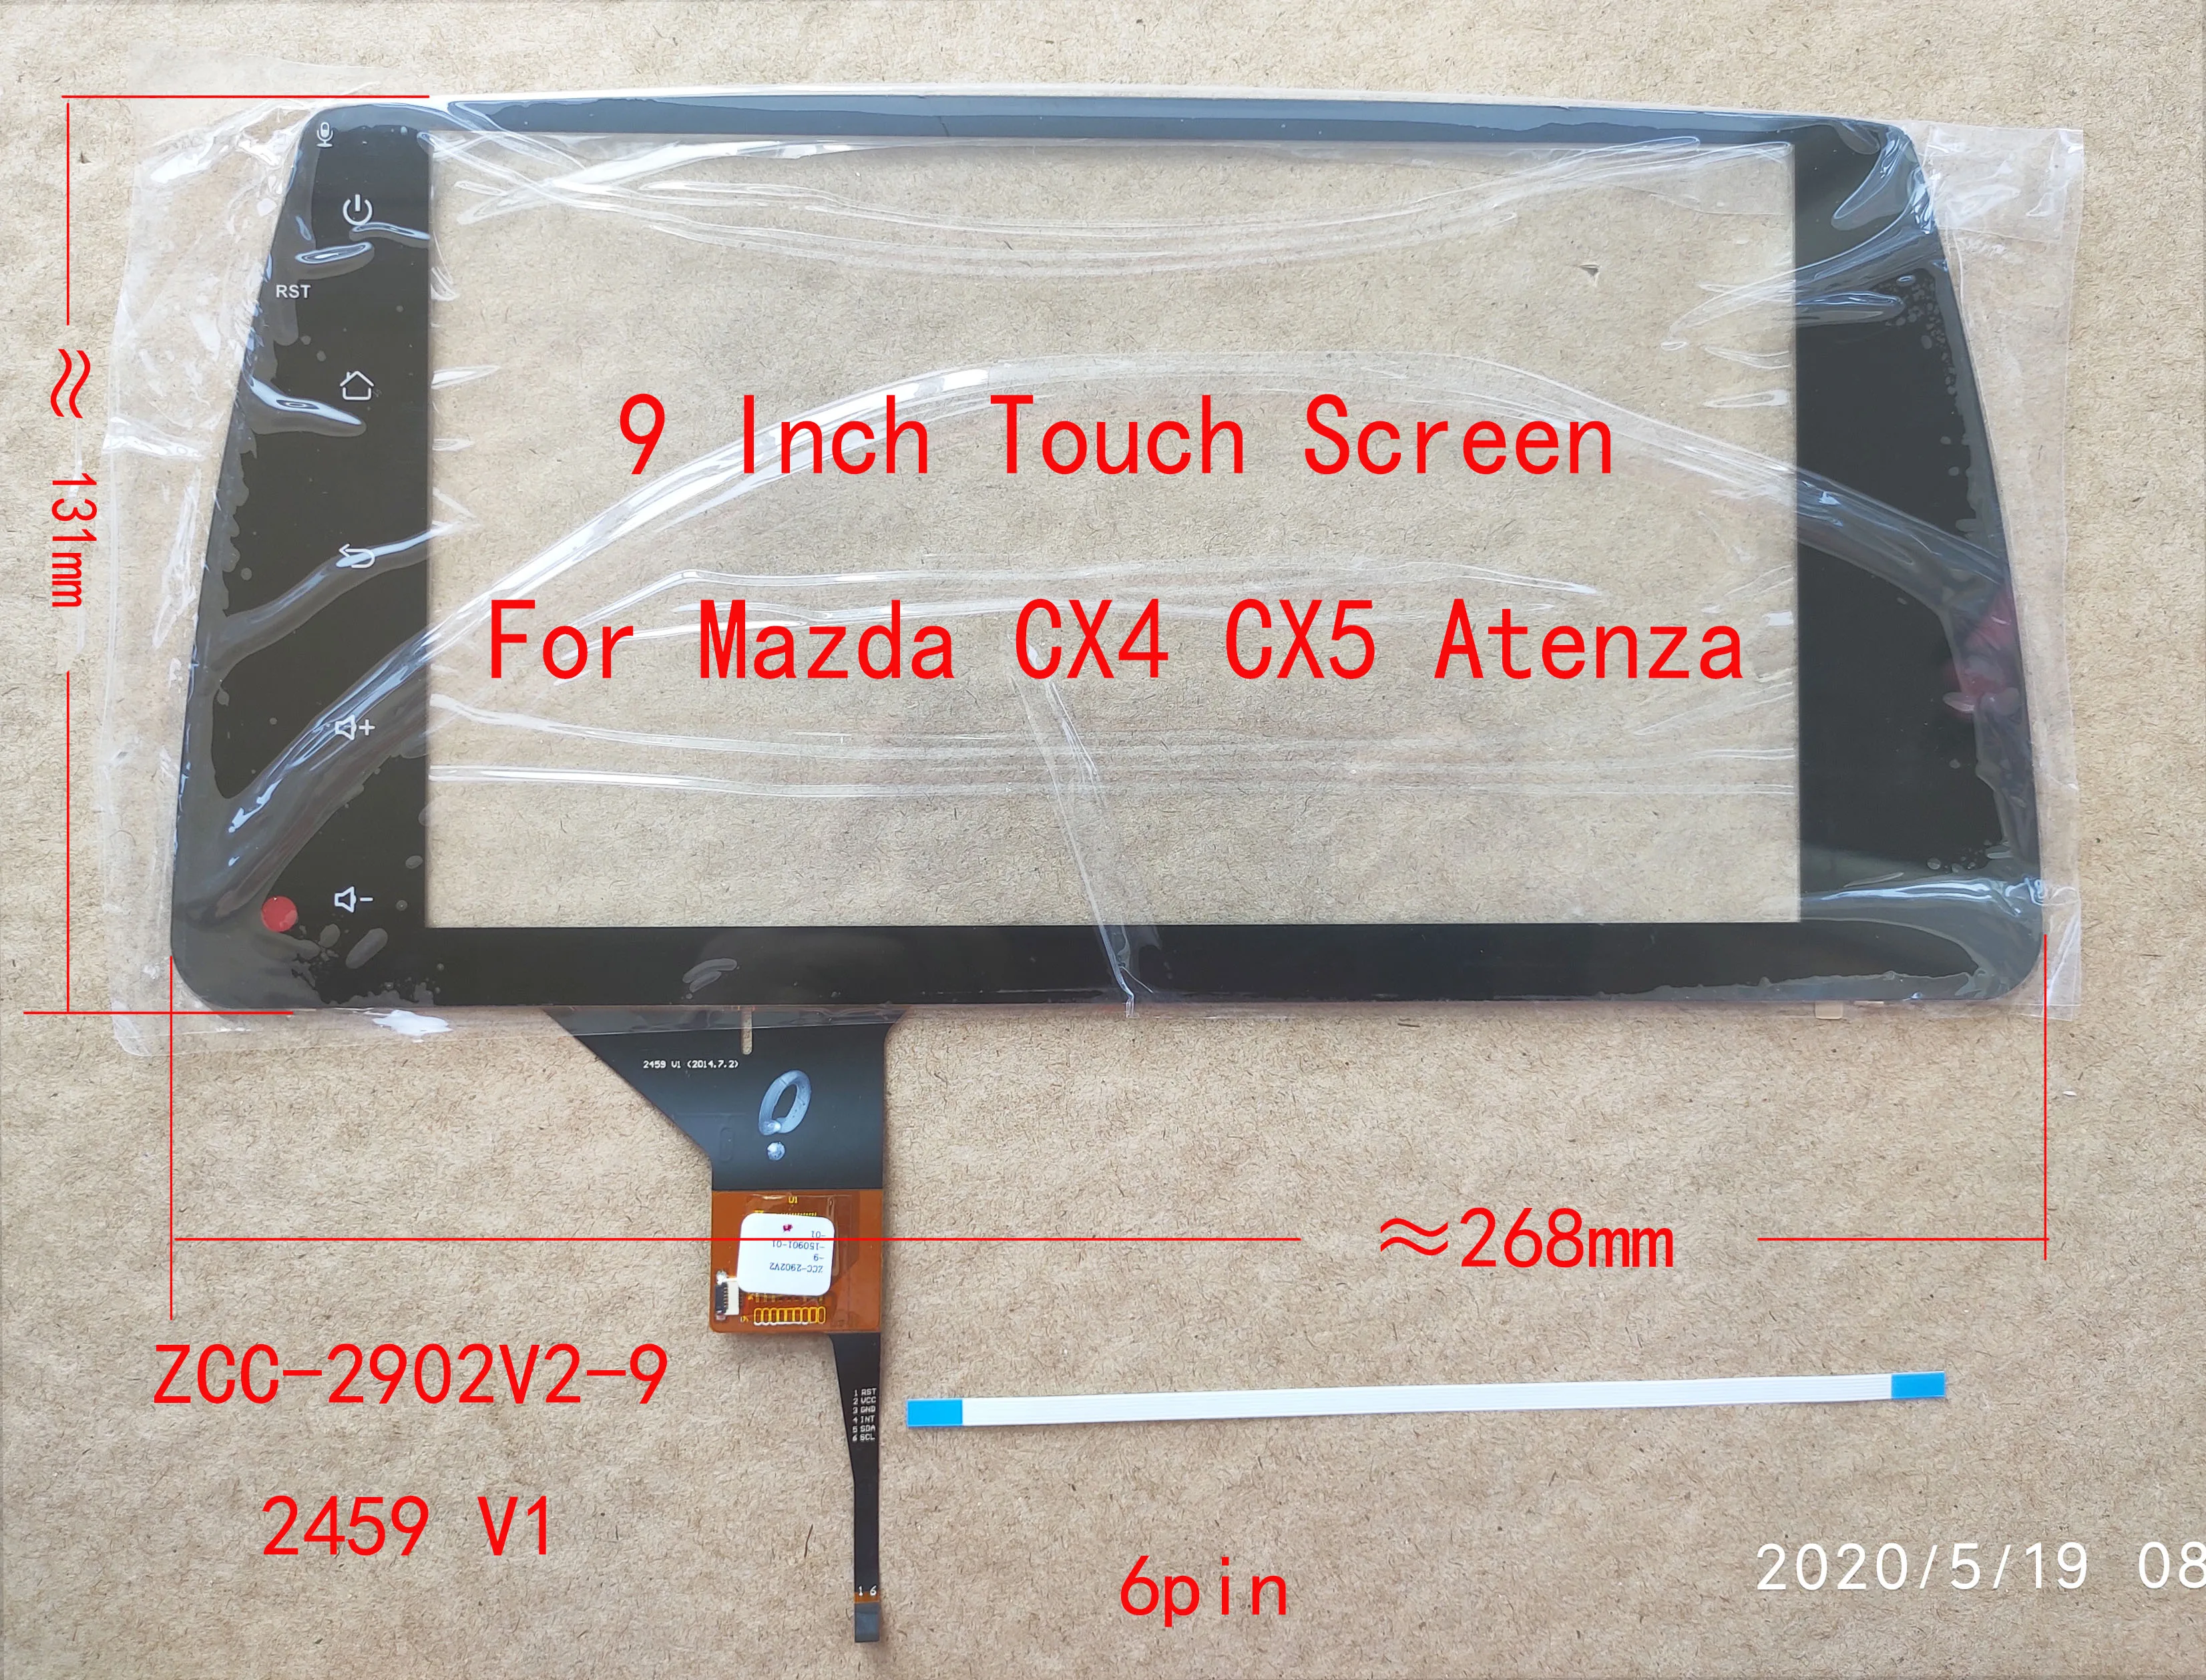 

9 Inch Touch Screen Digitizer Sensor For Mazda CX4 CX5 Atenza 268*131mm GT911 928 9271 6Pin ZCC-2902v2 Support wholesale